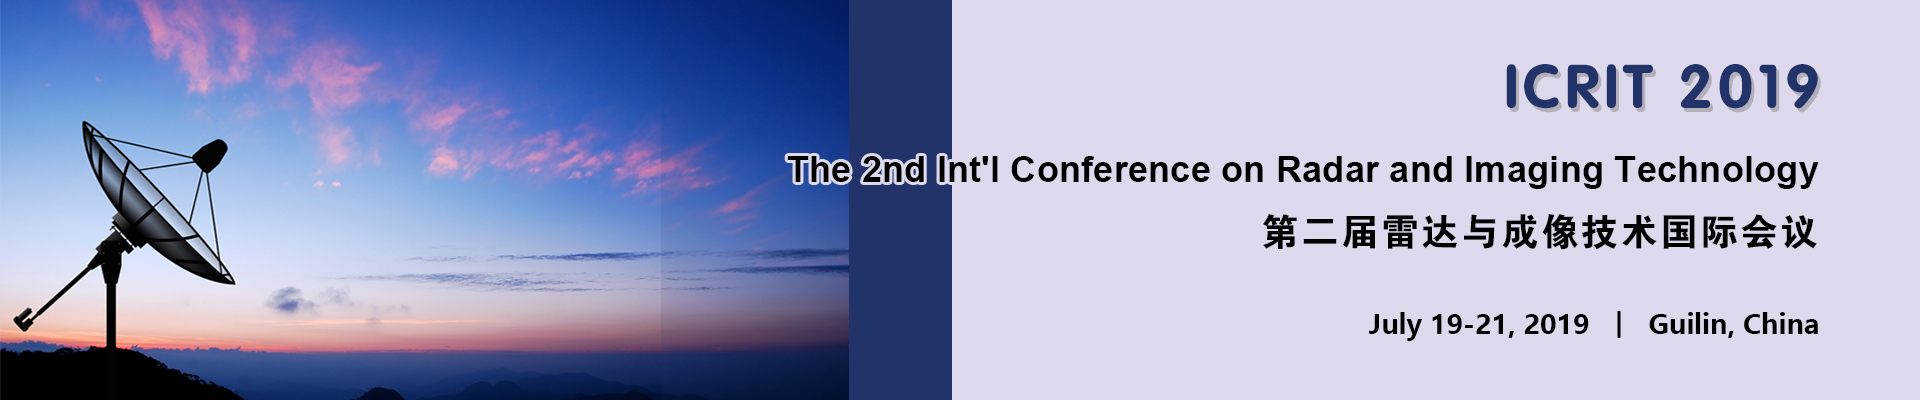 The 2nd Int'l Conference on Radar and Imaging Technology (ICRIT 2019), Guilin, Guangxi, China